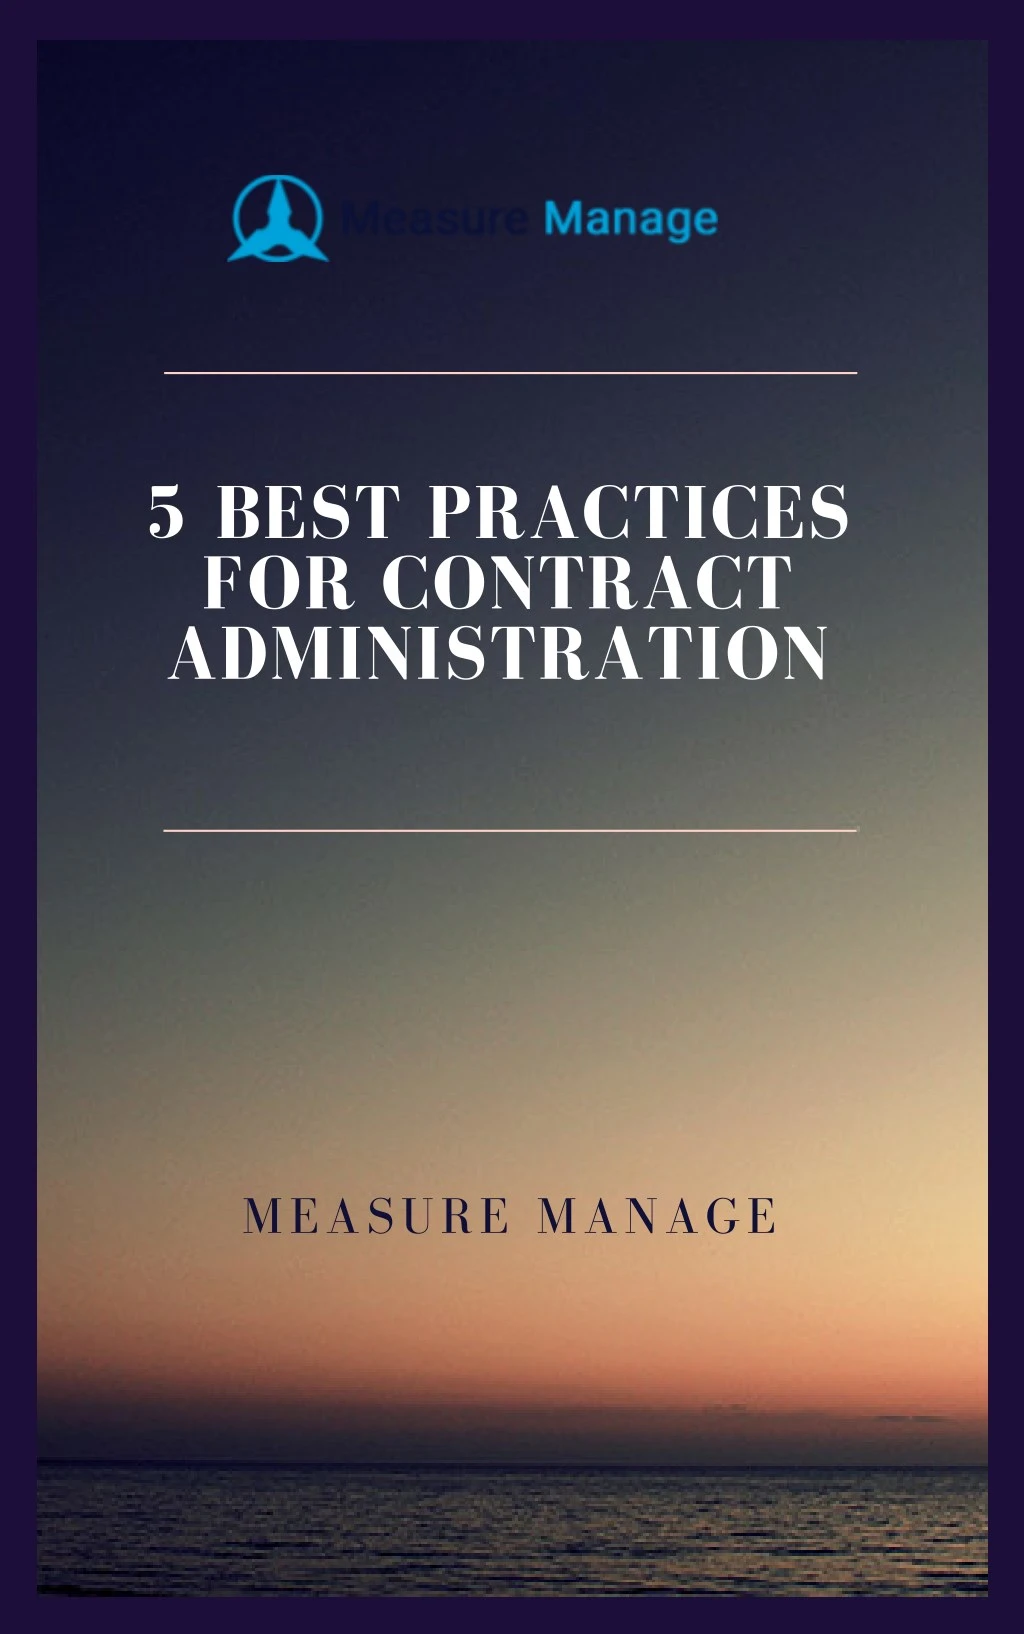 5 best practices for contract administration